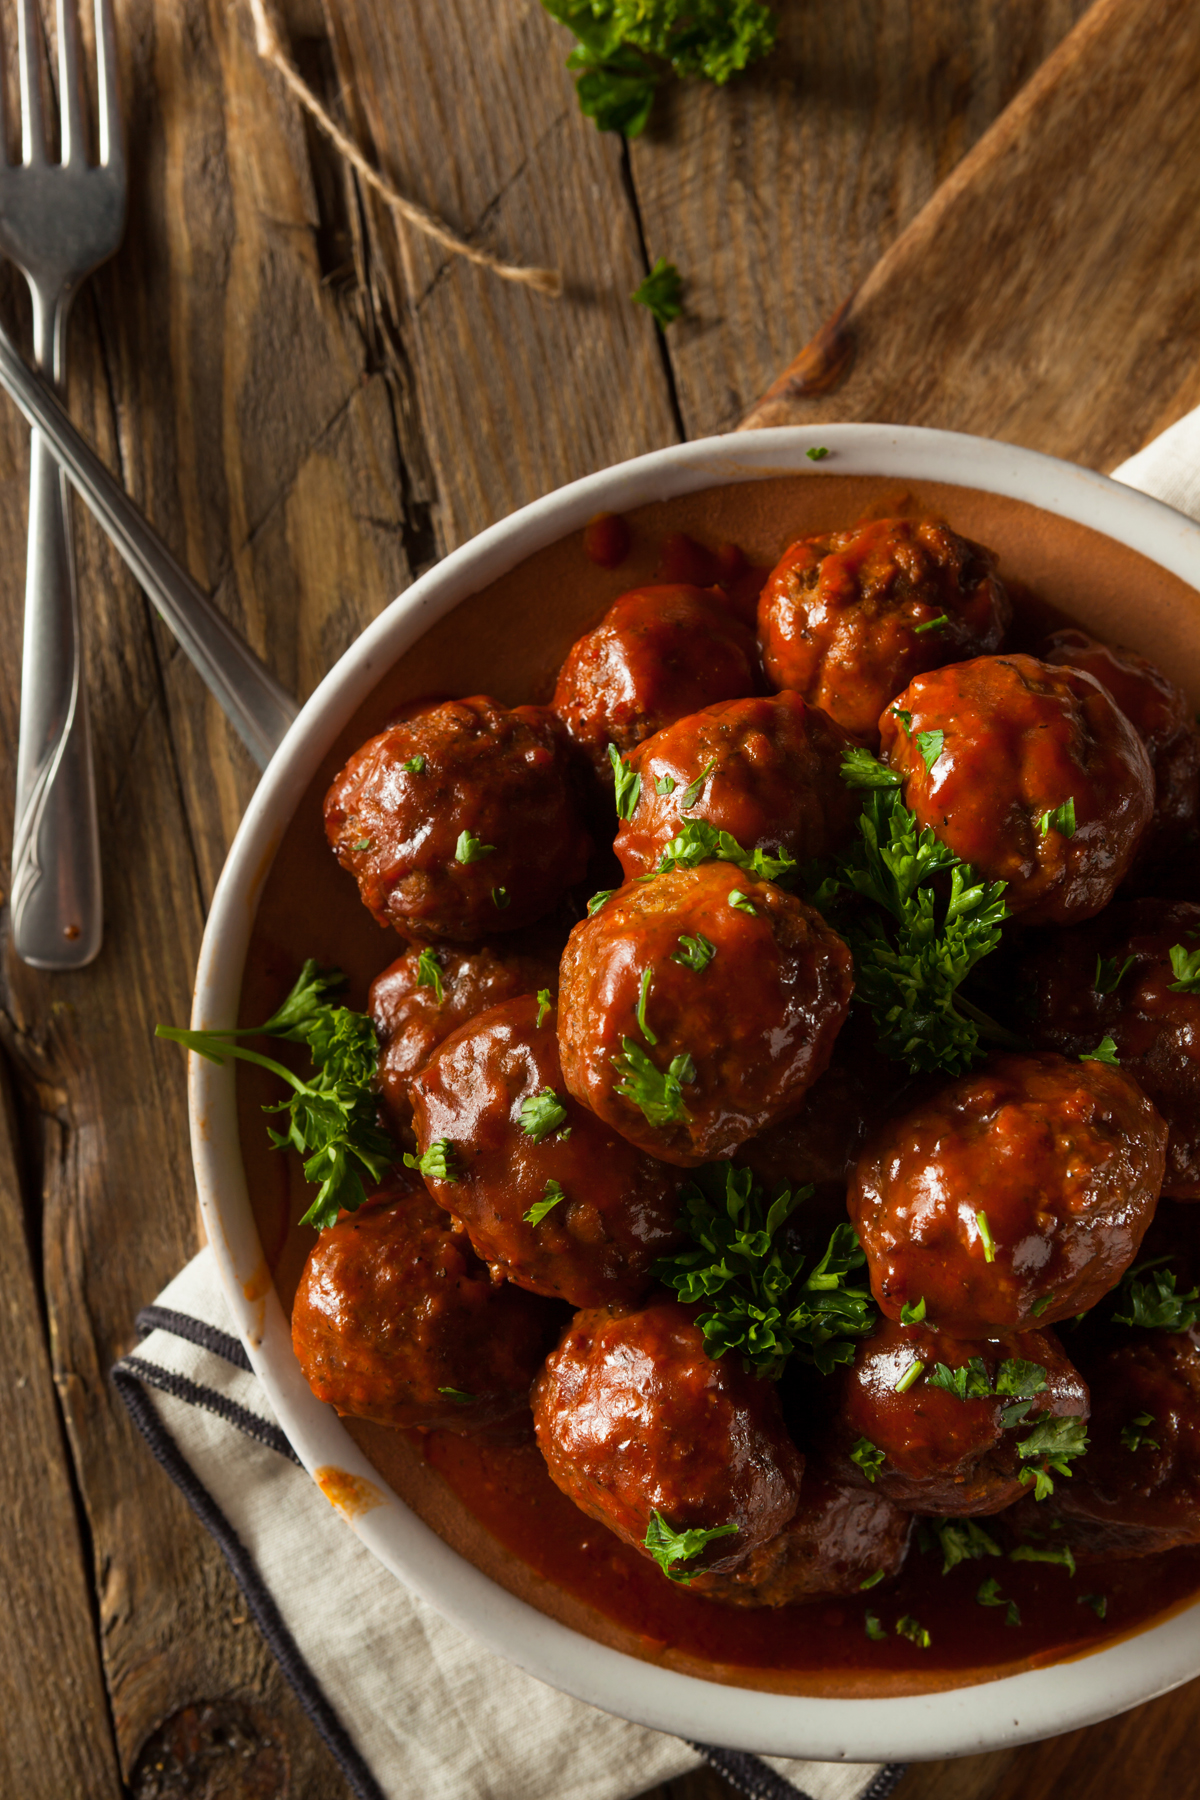 Homemade Barbecue Meat Balls With Red Sauce